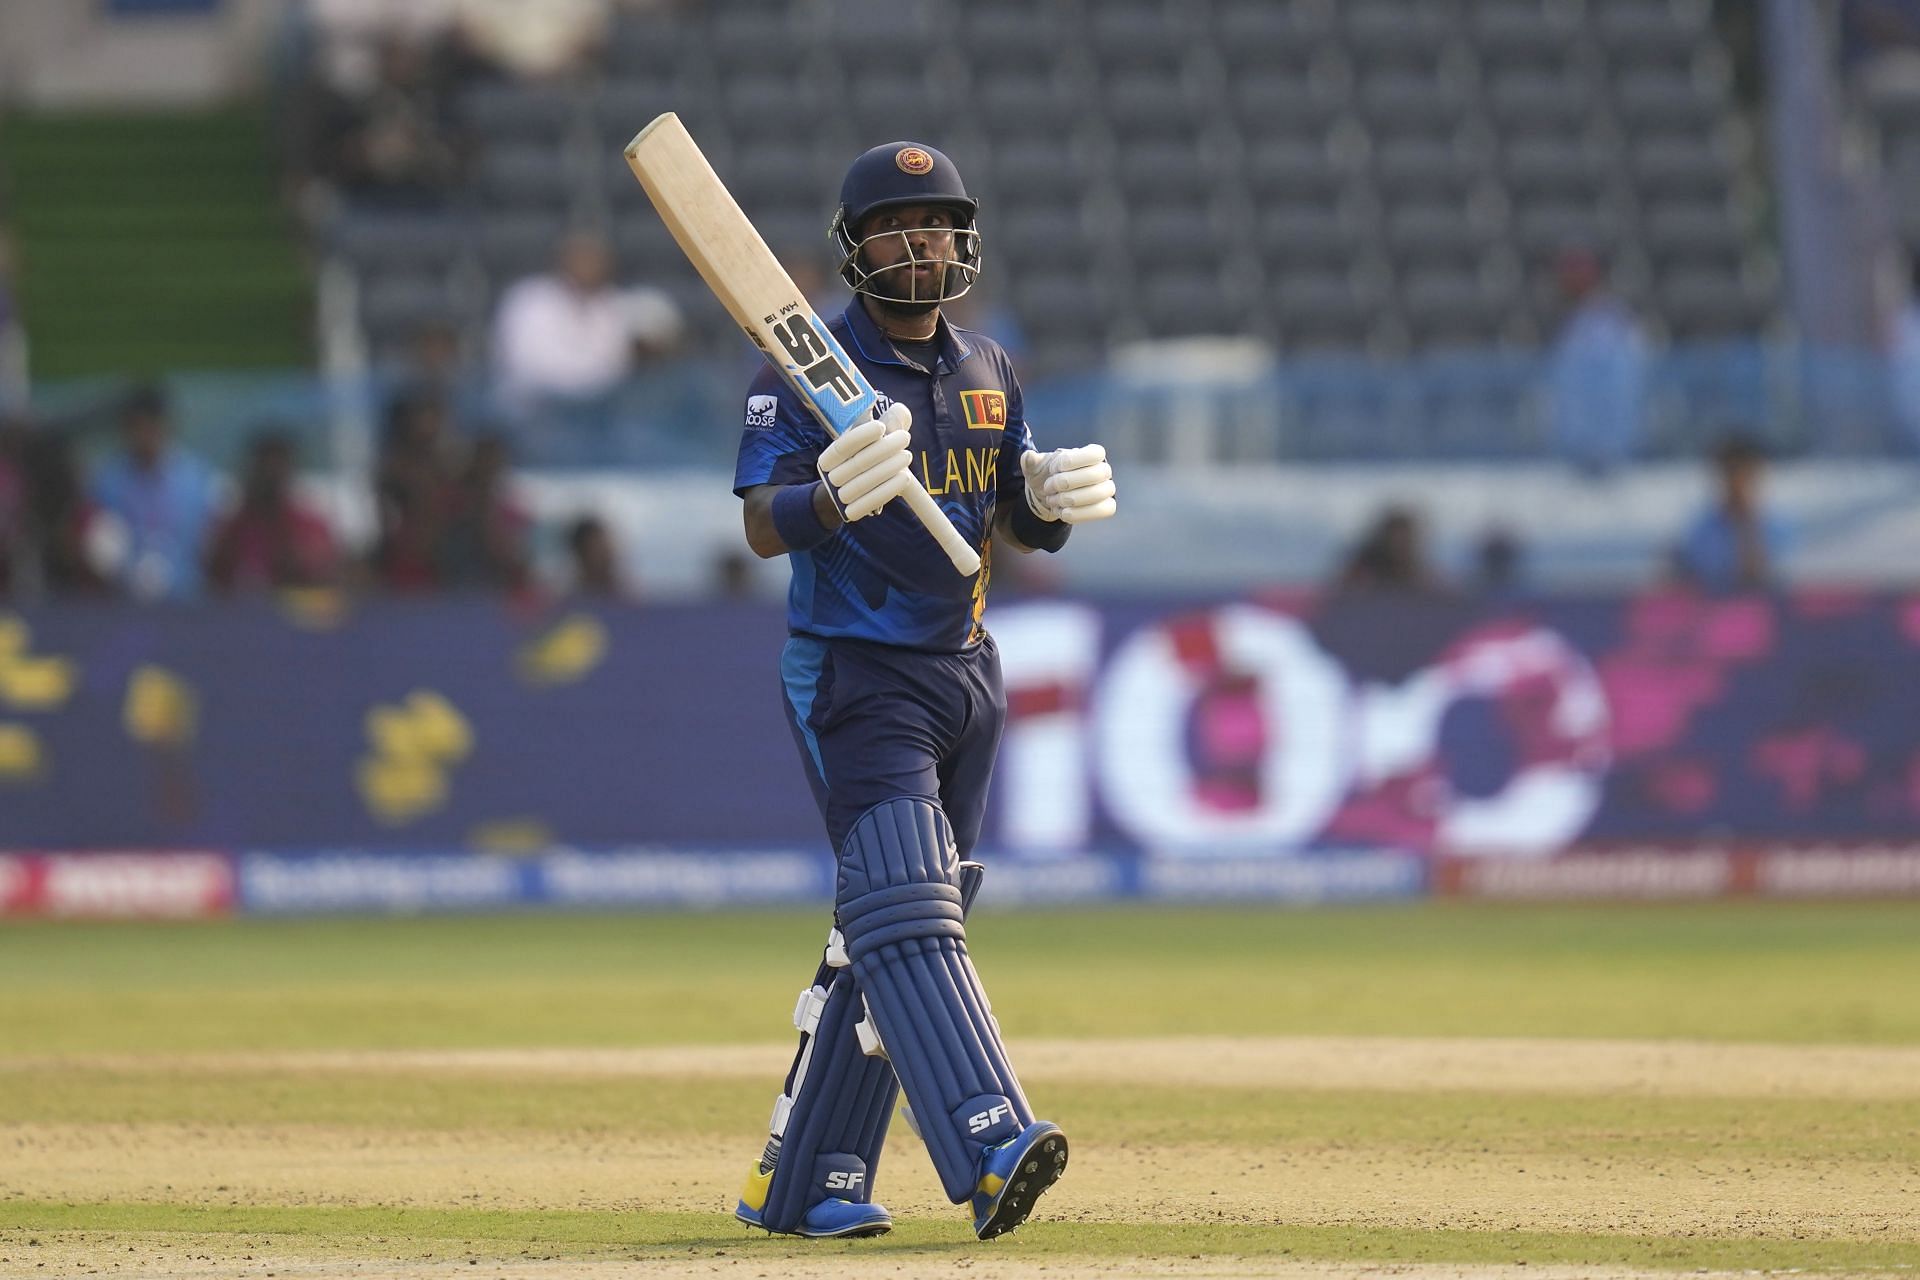 Kusal Mendis is conjuring World Cup magic, one game at a time